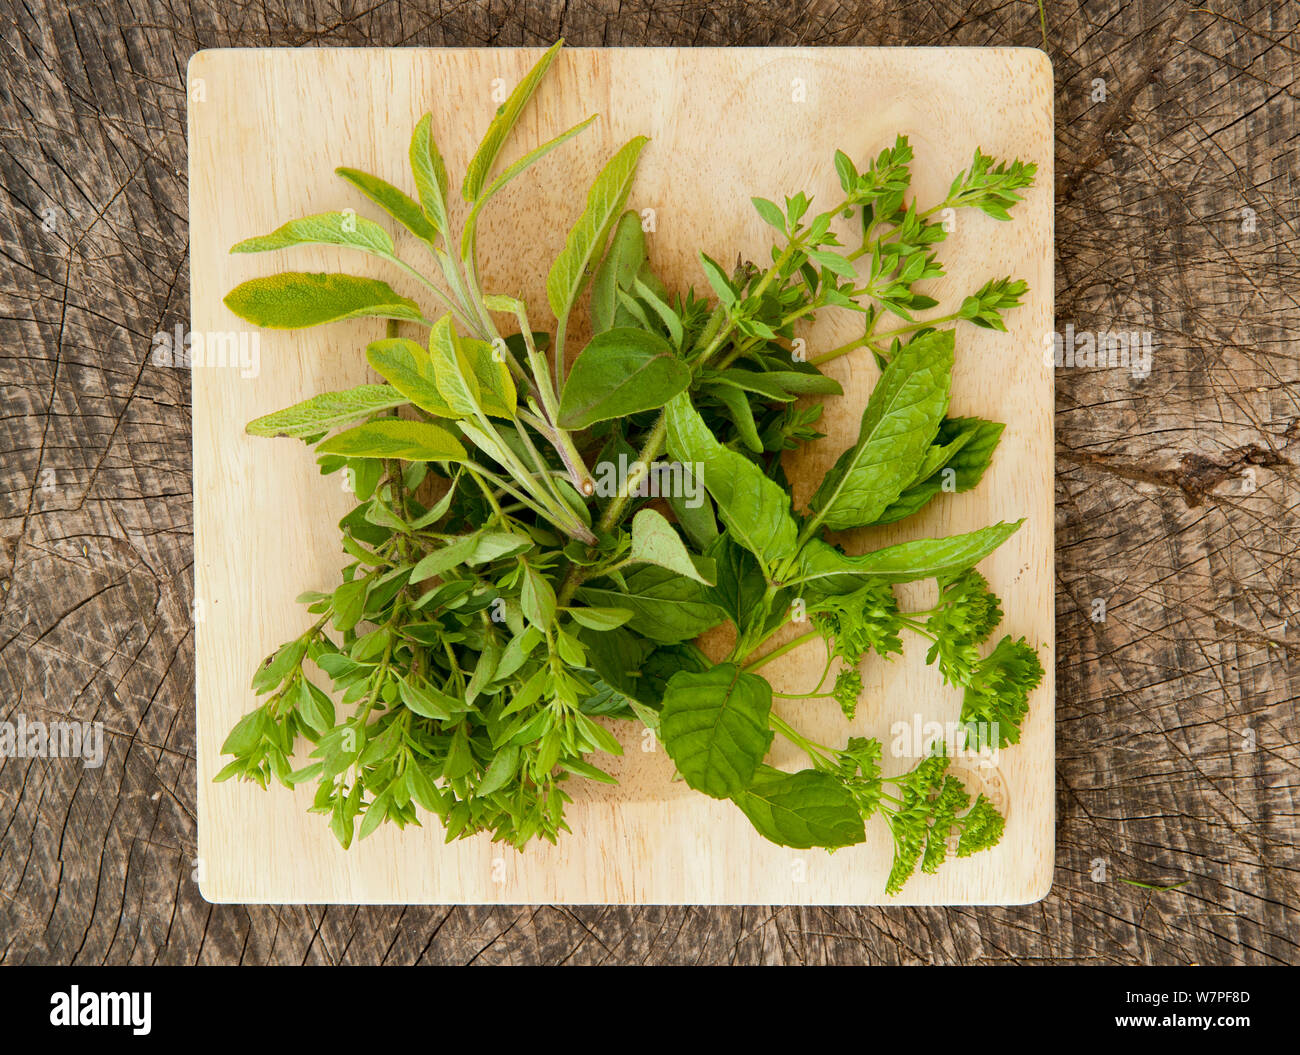 Cooking herbs, including mint and parsley, on chopping board Stock Photo